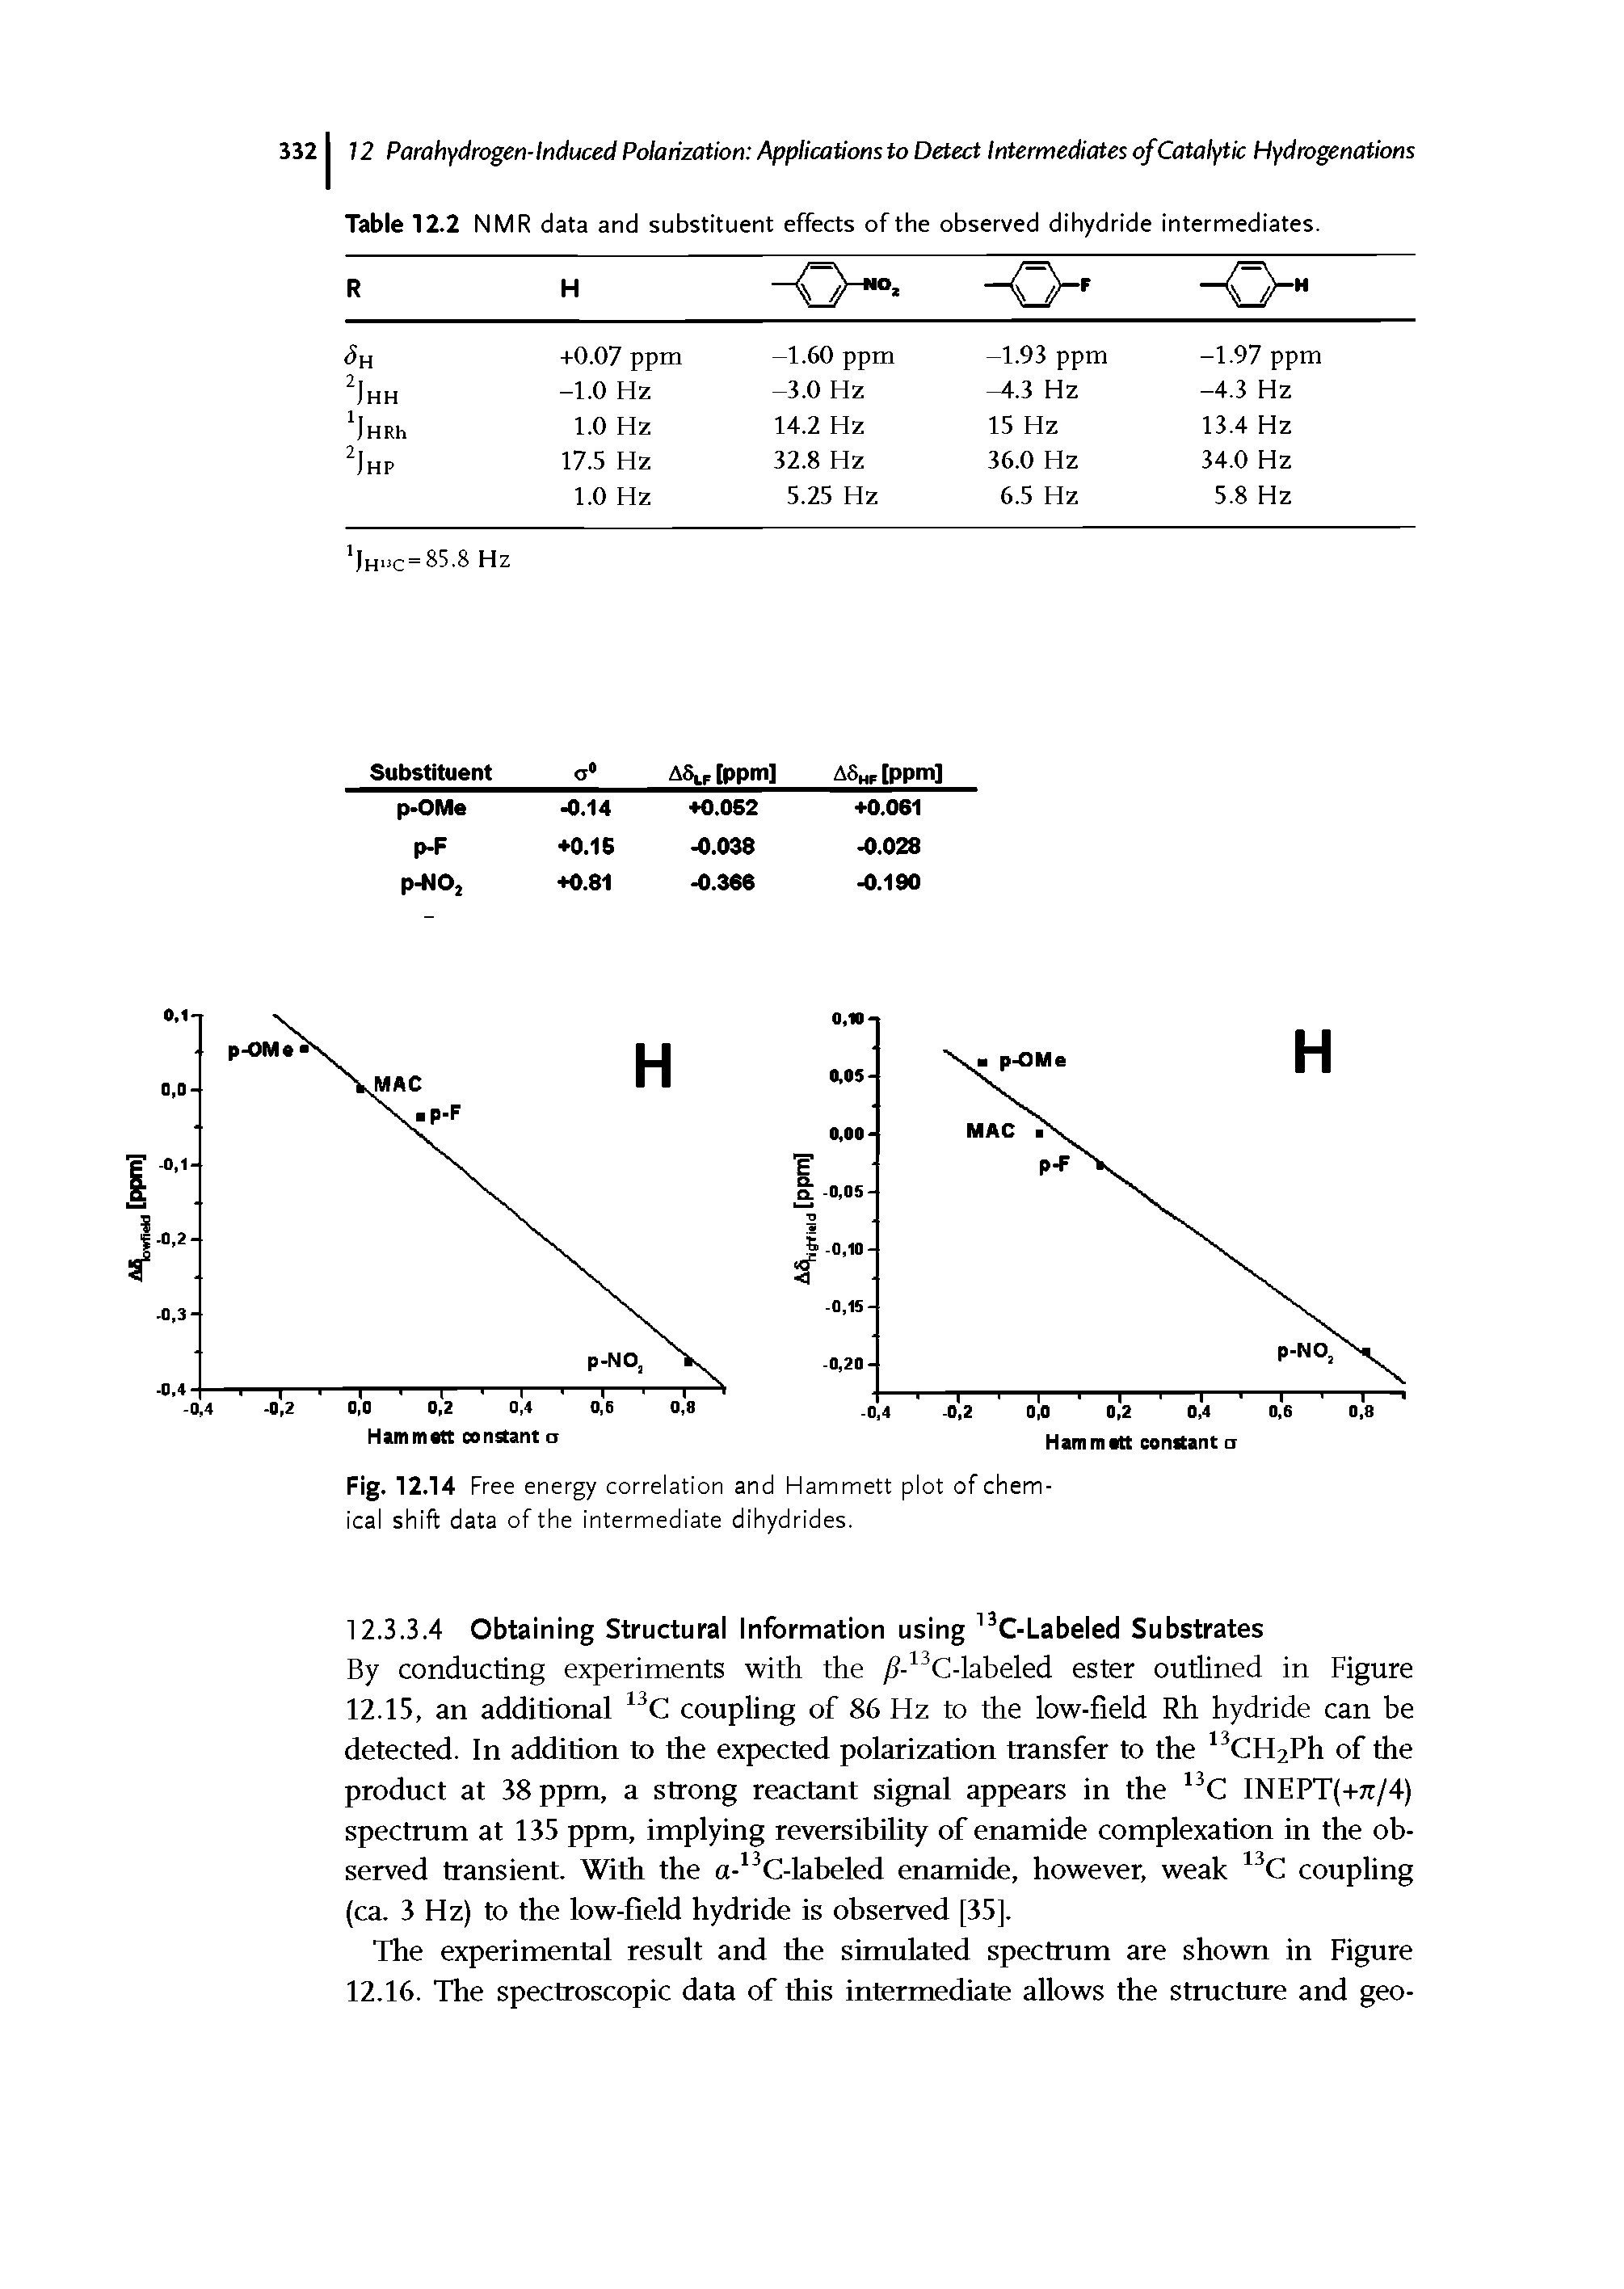 Table 12.2 NMR data and substituent effects of the observed dihydride intermediates.